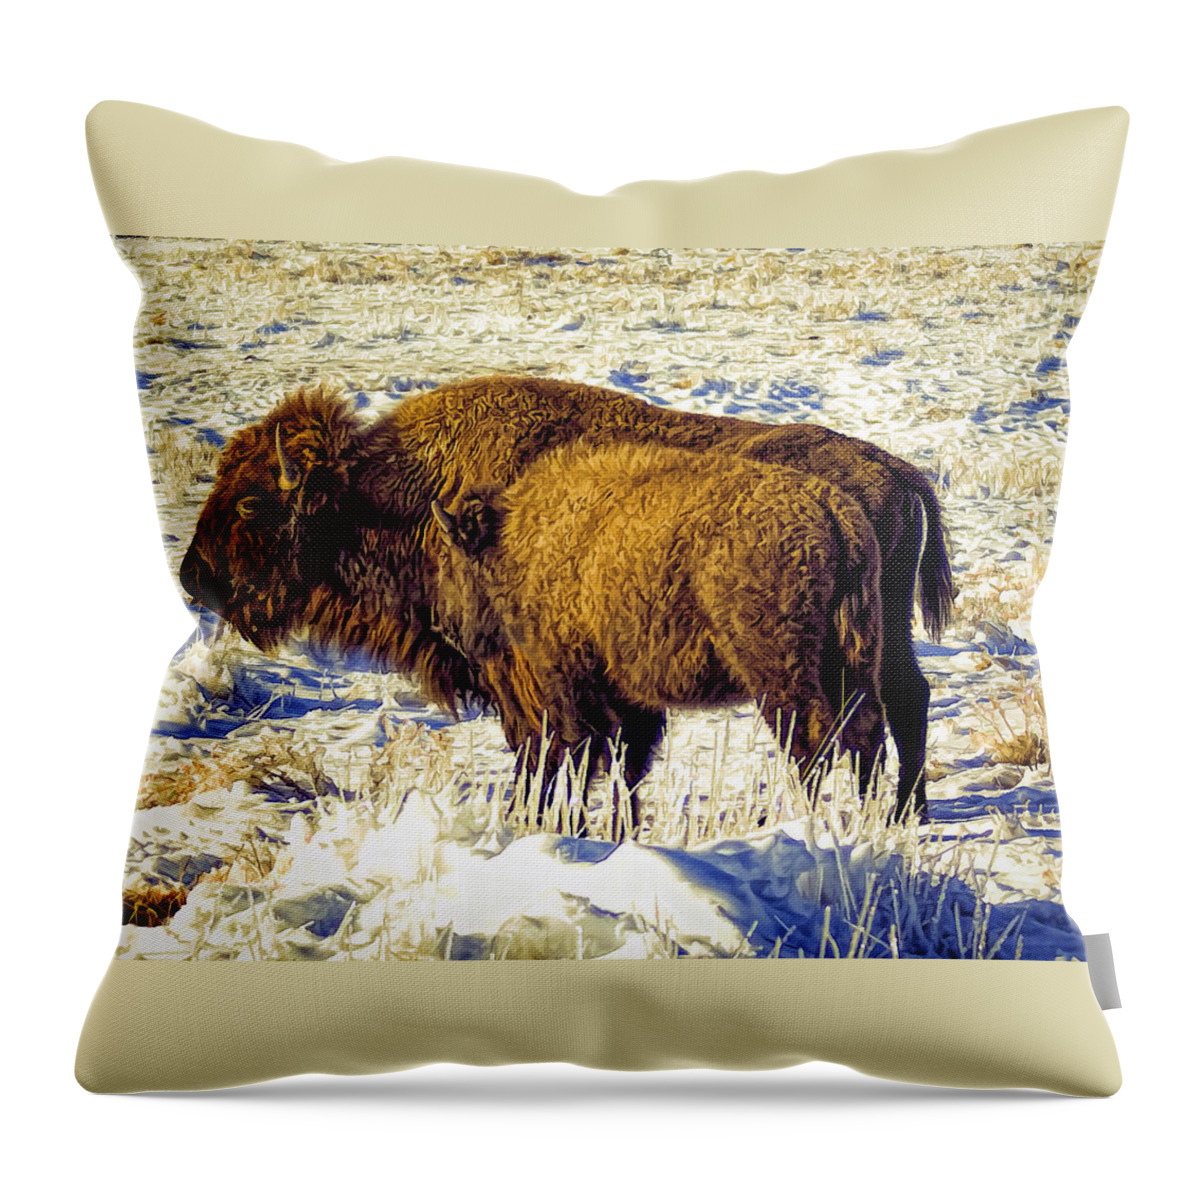 Buffalo Throw Pillow featuring the photograph Buffalo Painting by Alan Hutchins